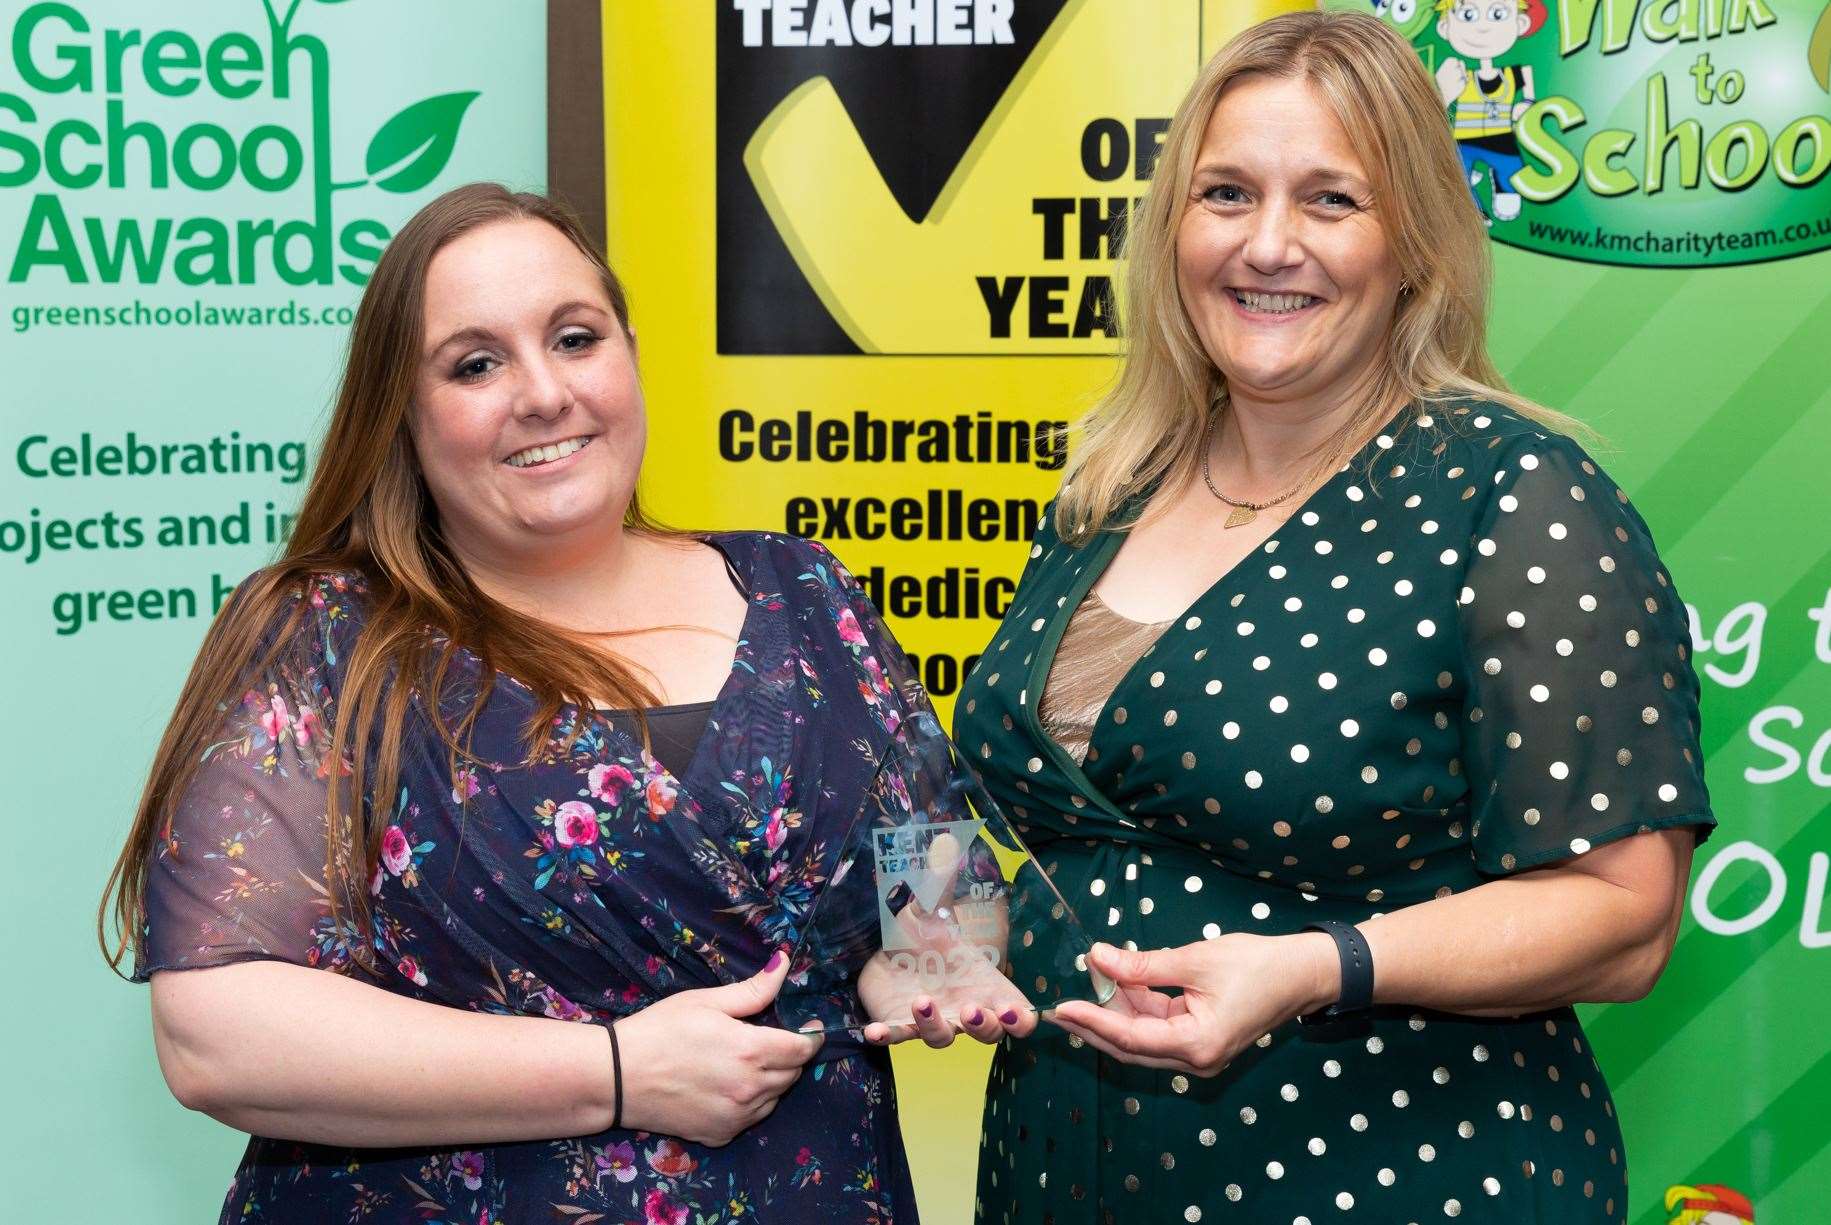 Overall Kent Secondary School T/A of the Year, Jessica Milliner of the Thomas Aveling School. Presented by Hayley King of KM Charity Team. Picture: Countrywide Photographic